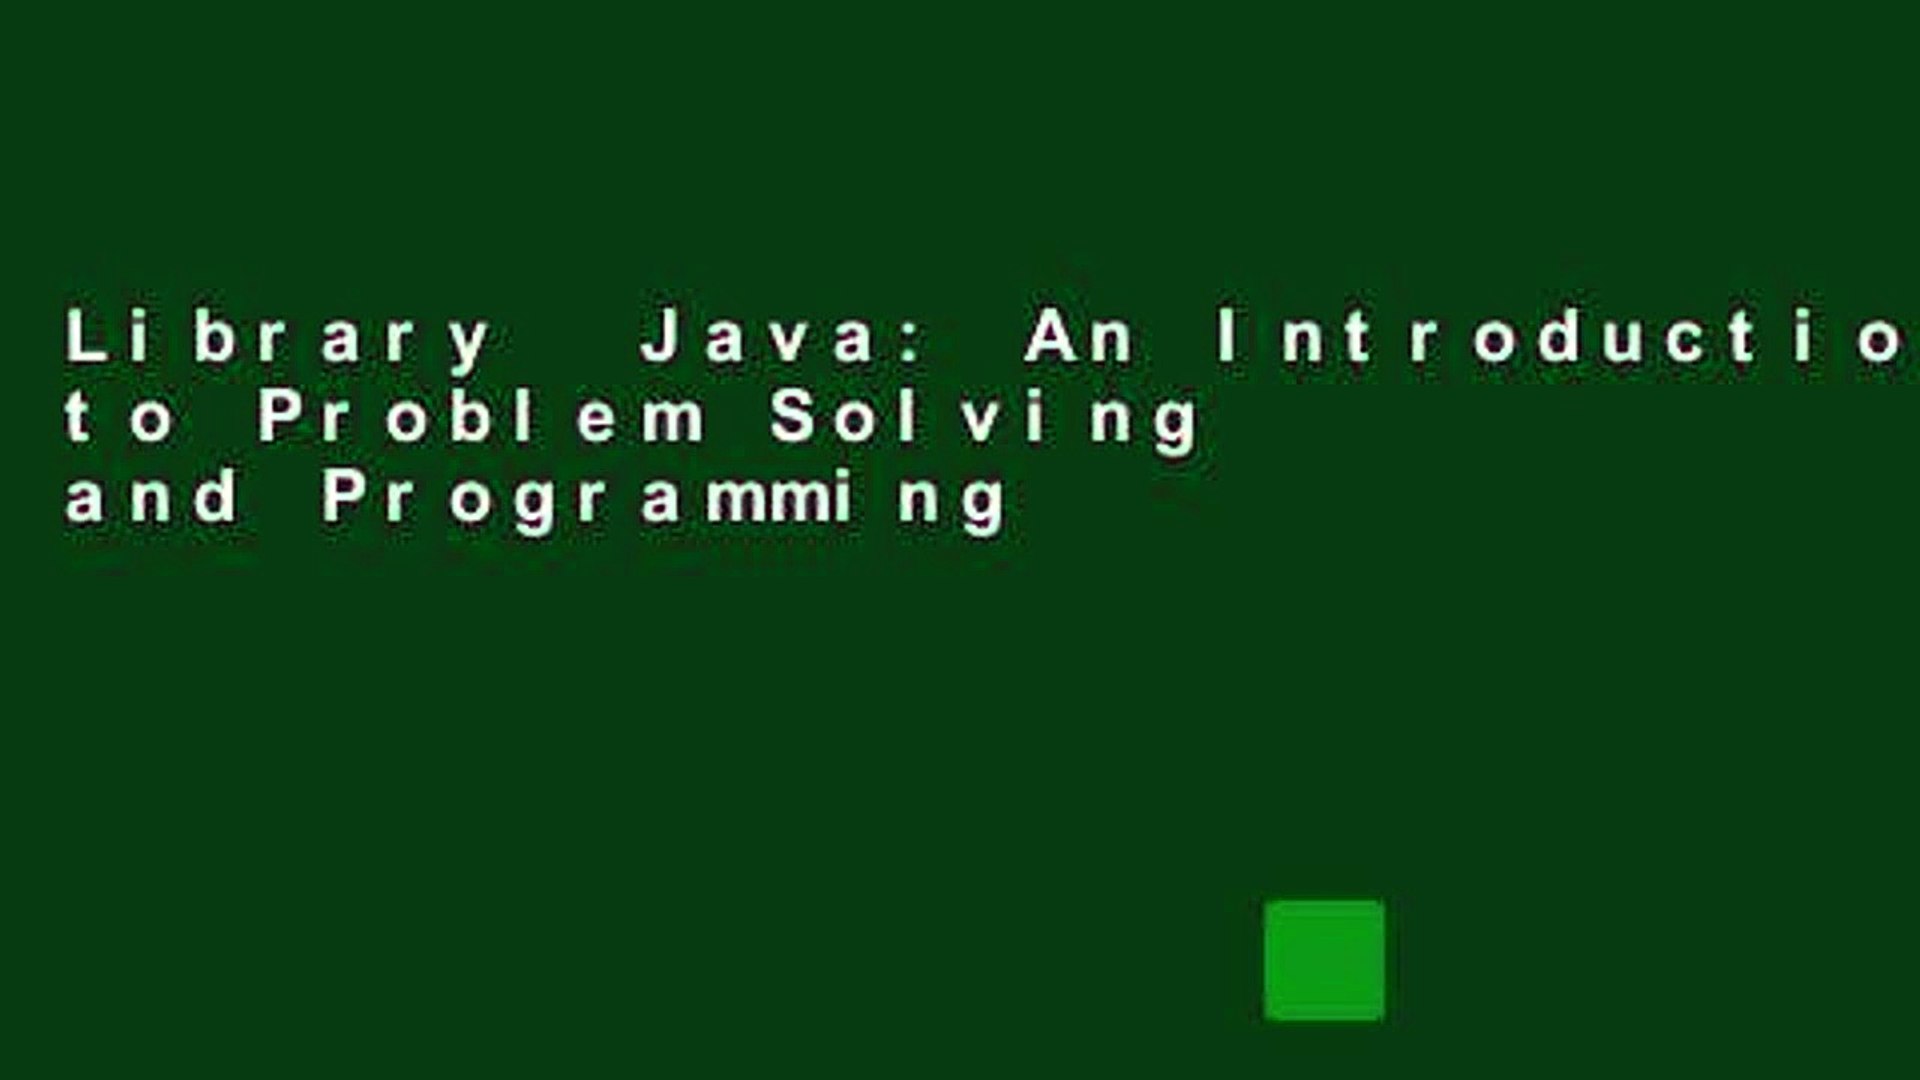 Library  Java: An Introduction to Problem Solving and Programming